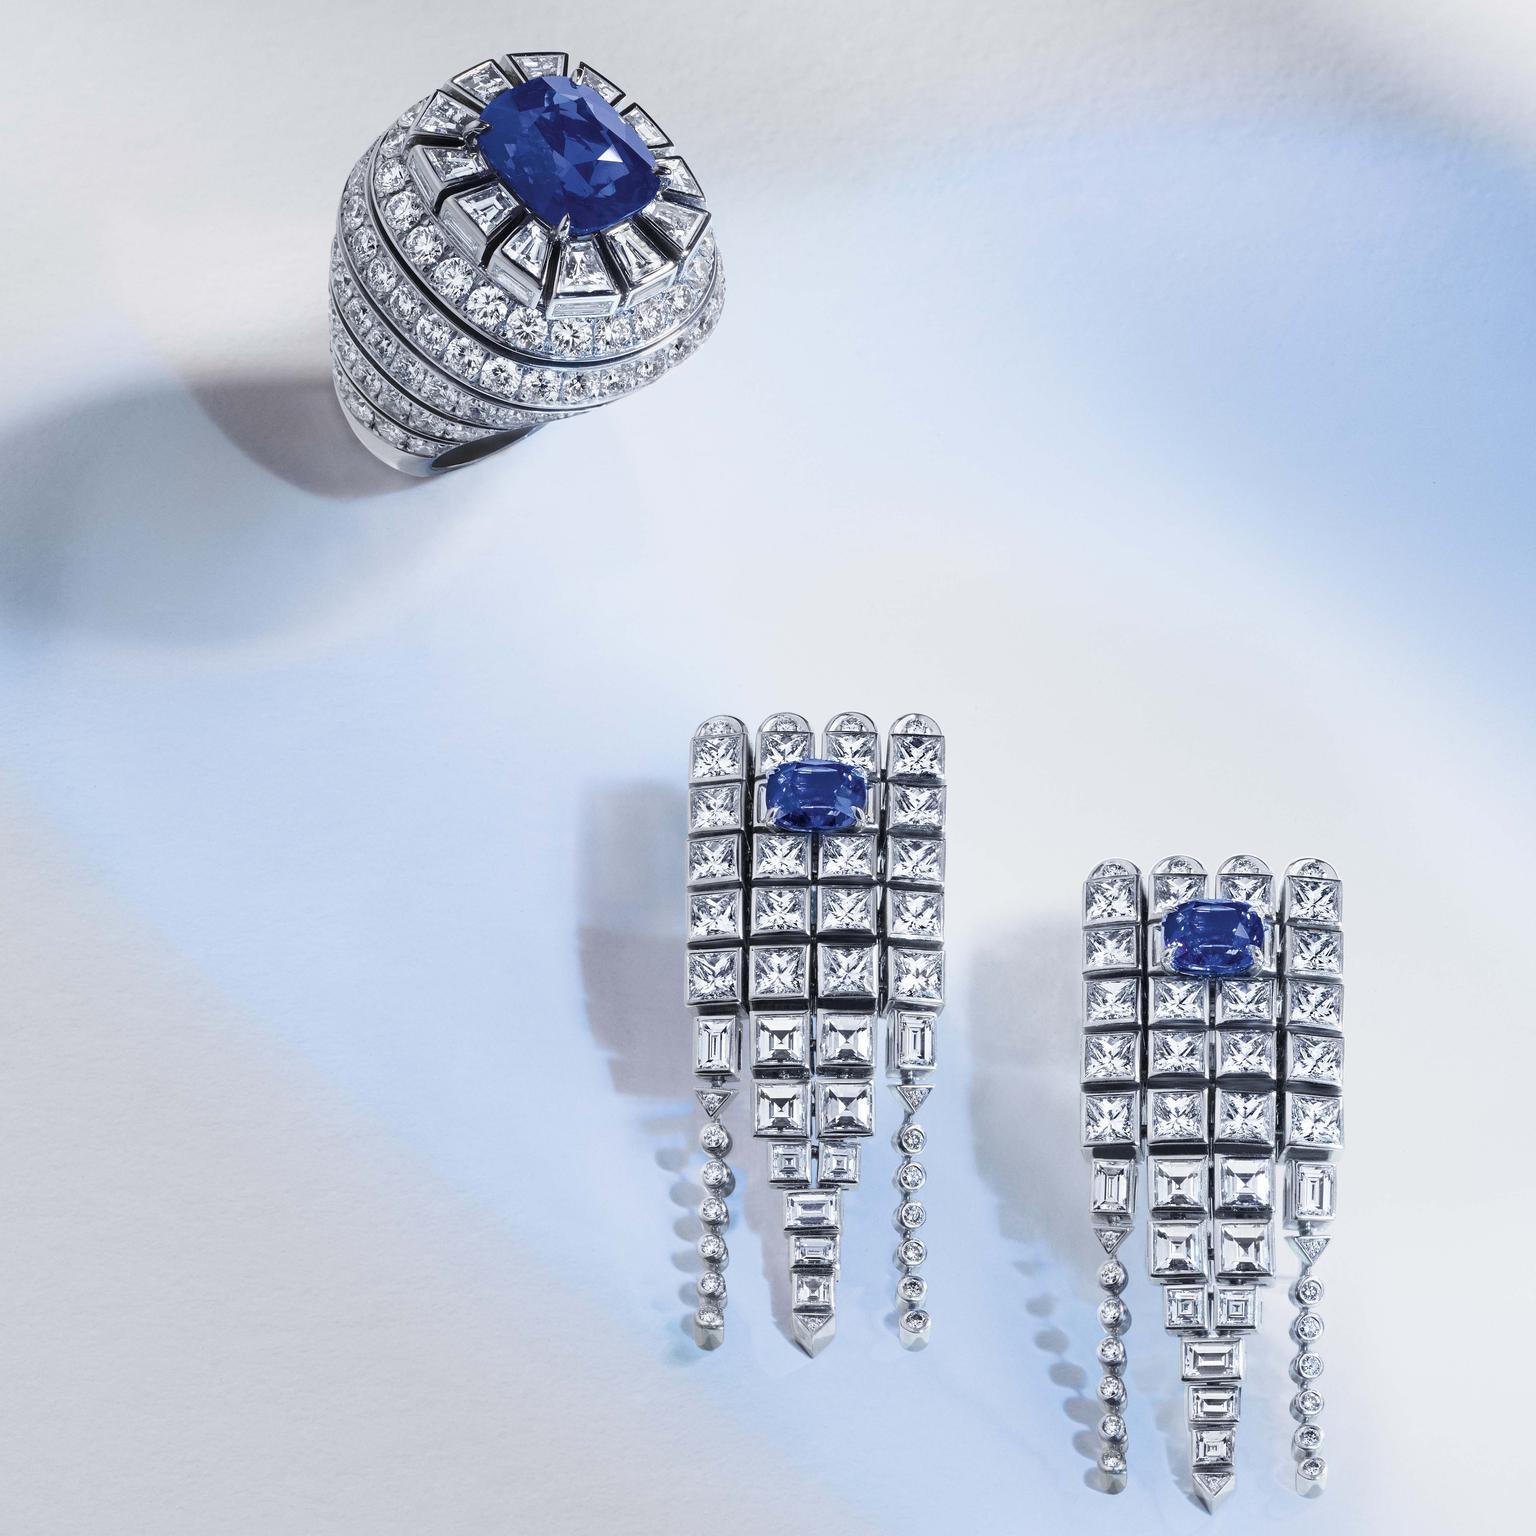 Louis Vuitton Riders of the Knights Le Royaume diamond and sapphire earrings and ring